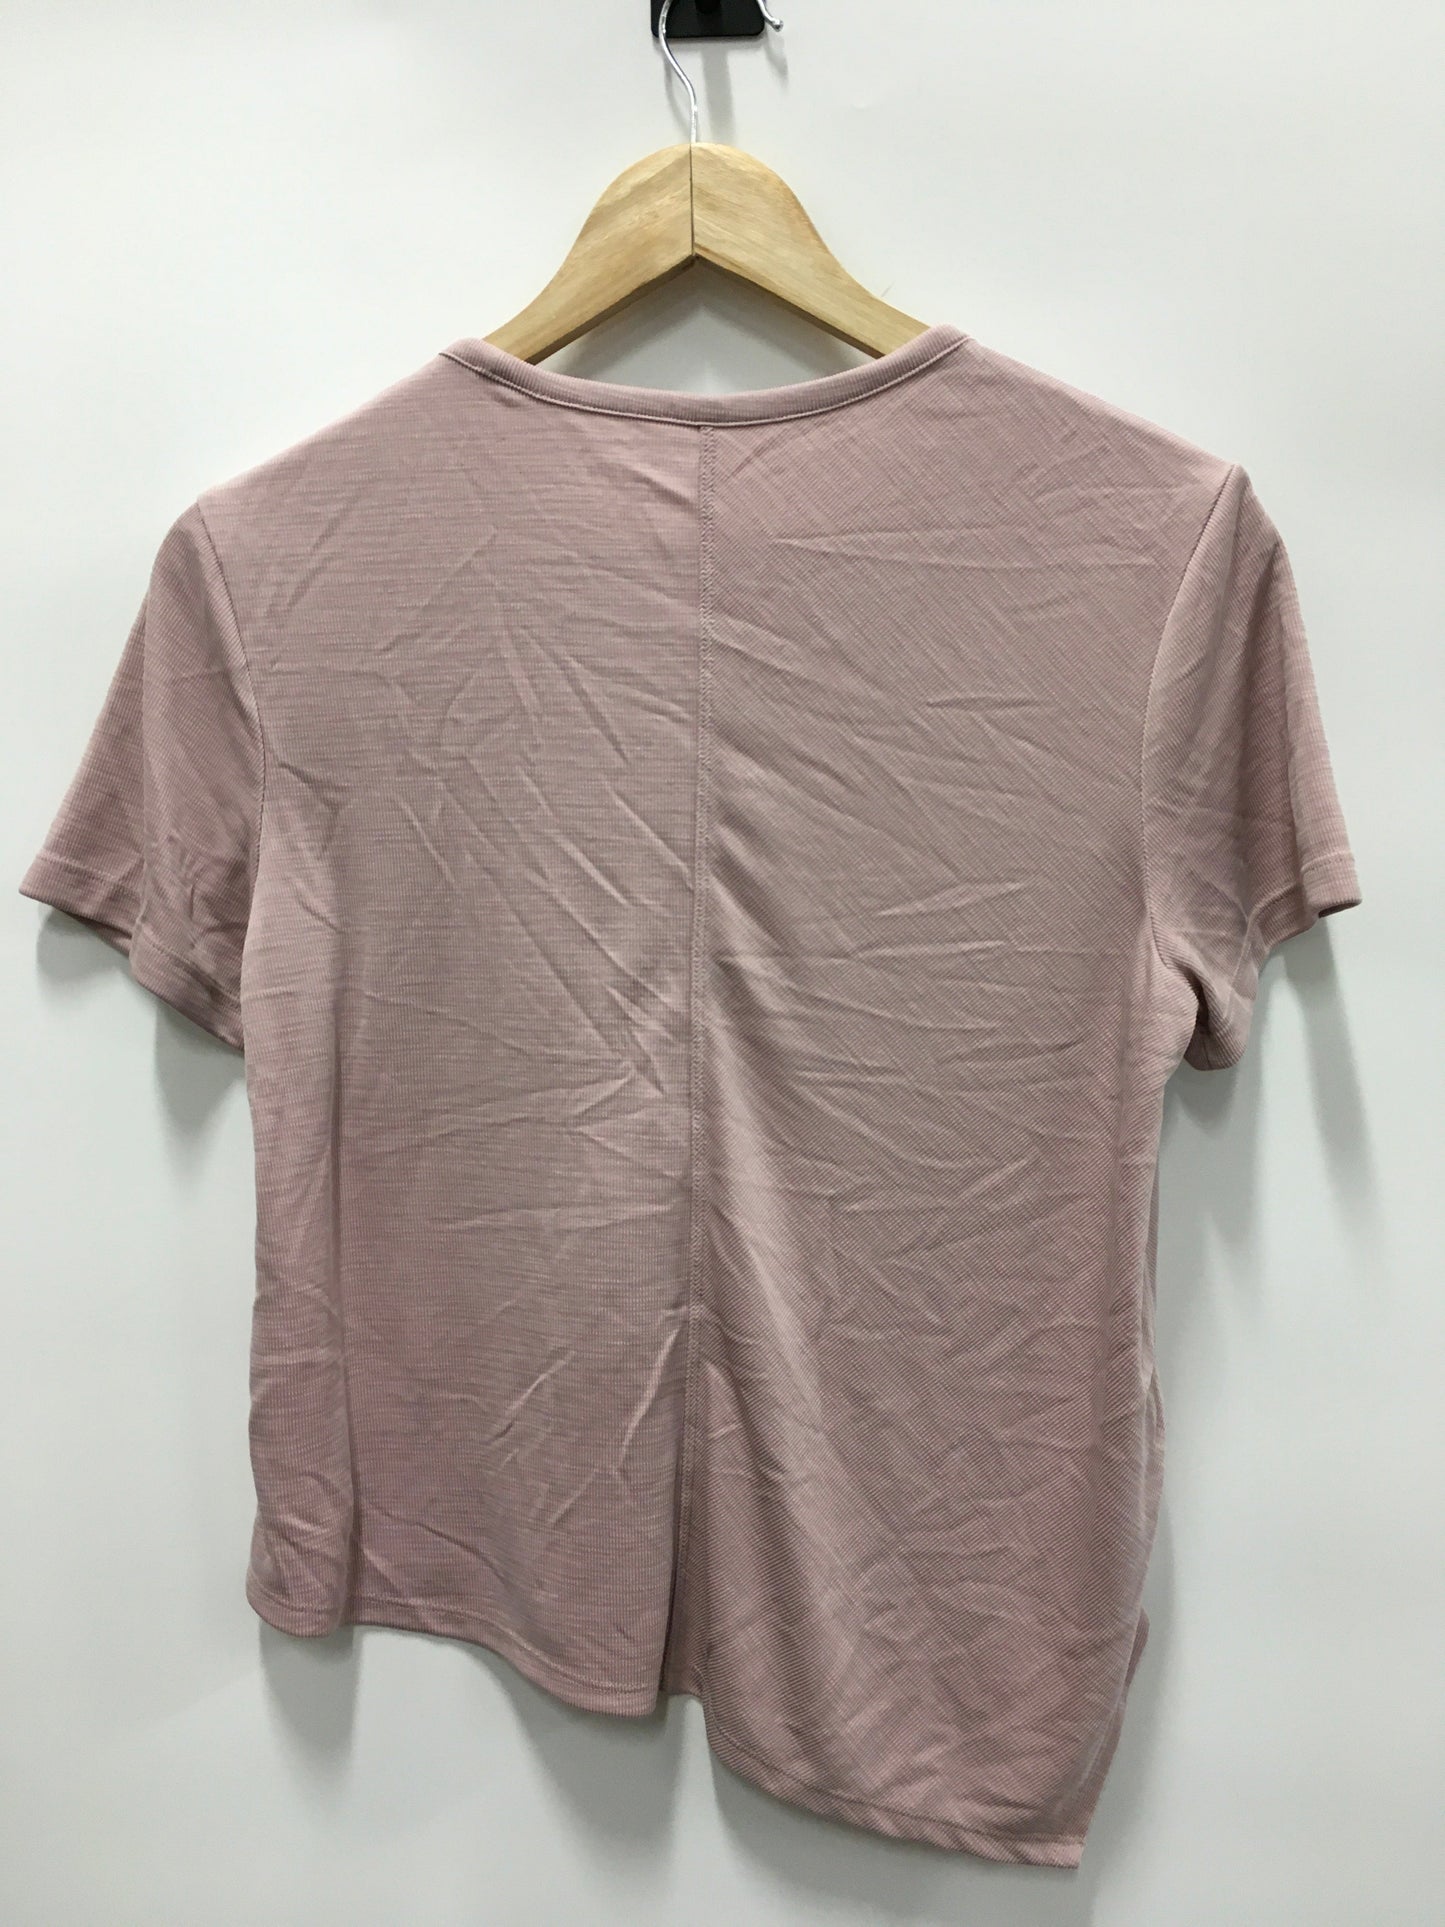 Athletic Top Short Sleeve By Athleta  Size: Petite   Small